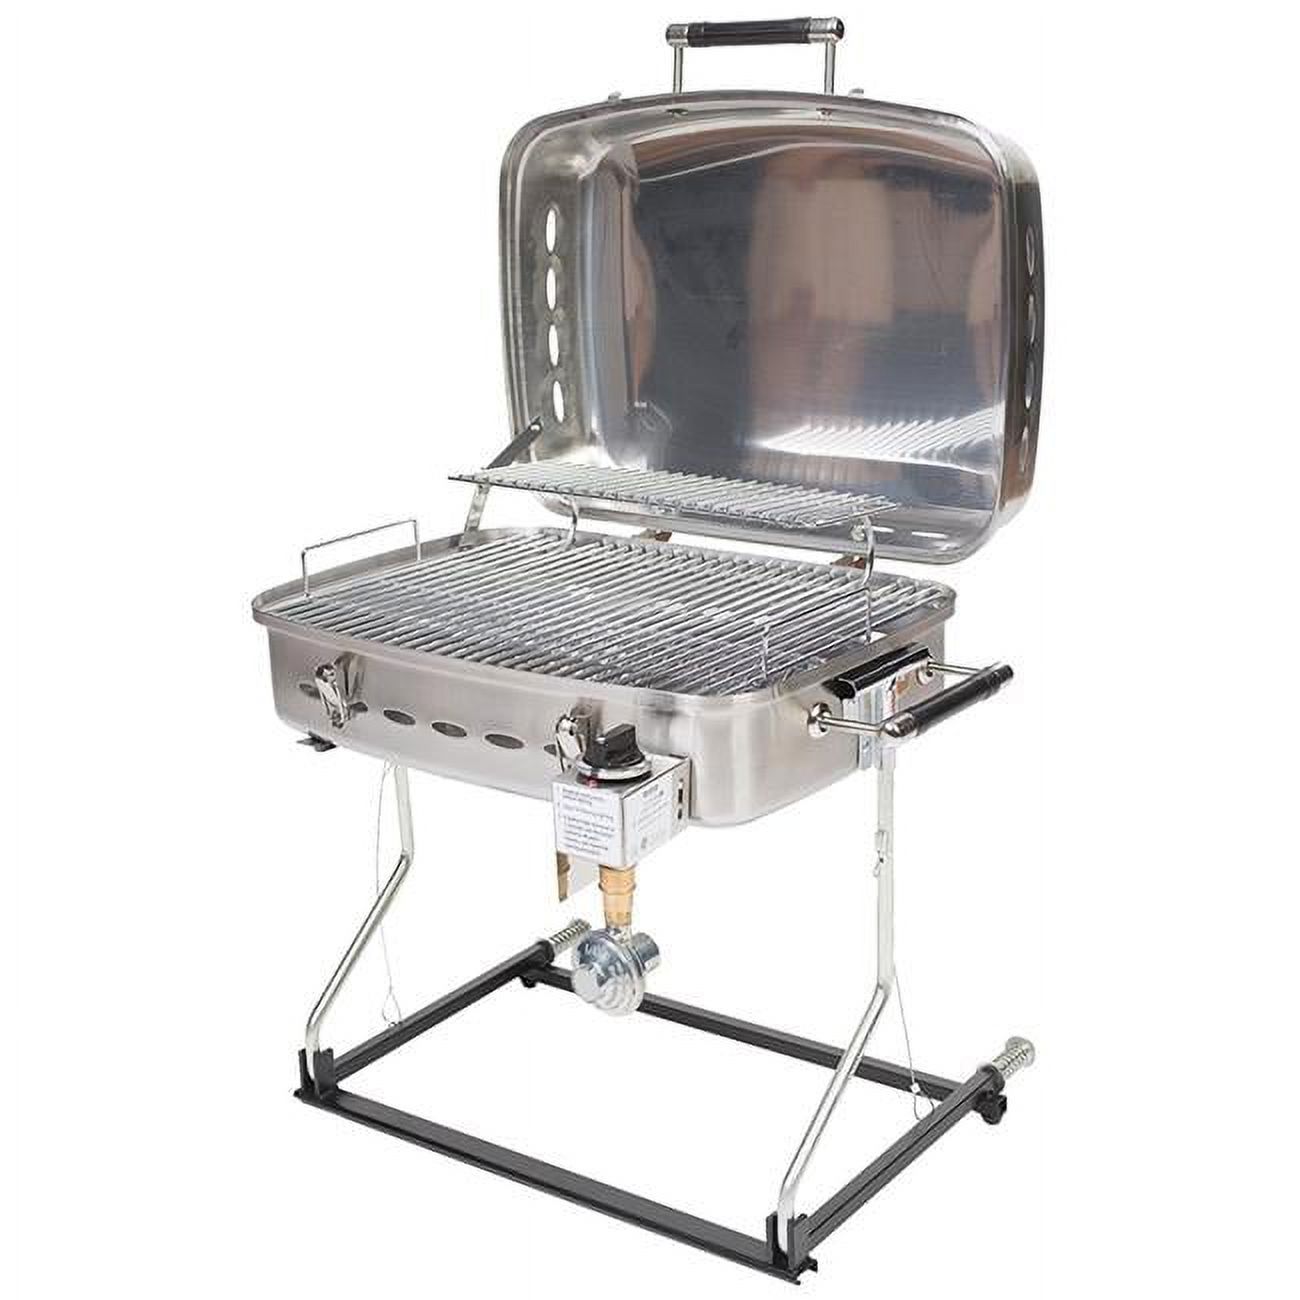 Faulkner 52302 Grill Deluxe Ss - image 1 of 4